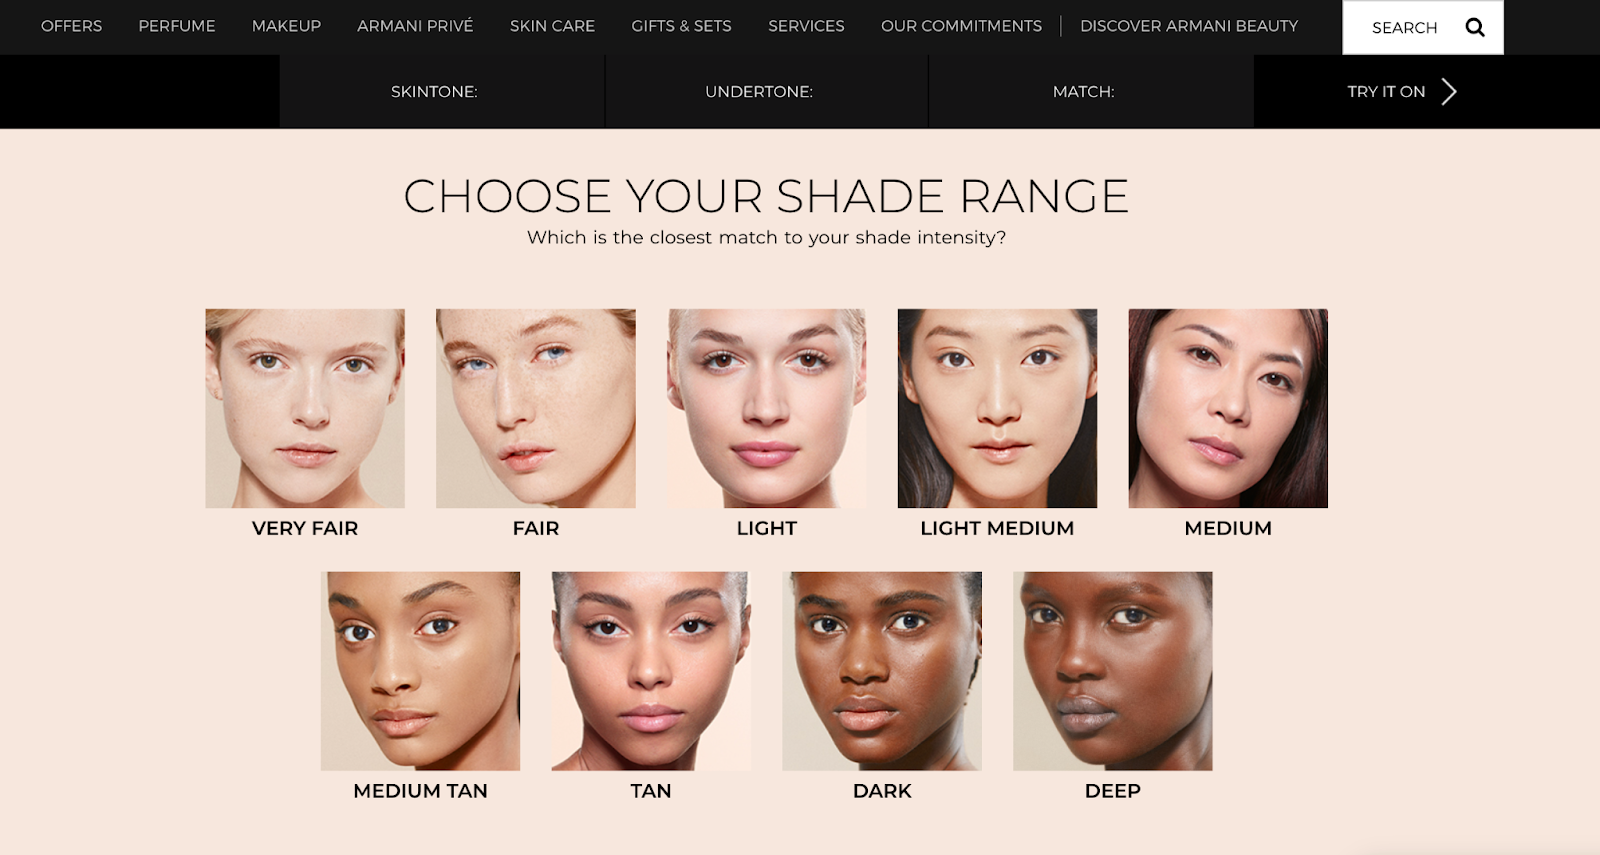 A selection of 10 different skin shades